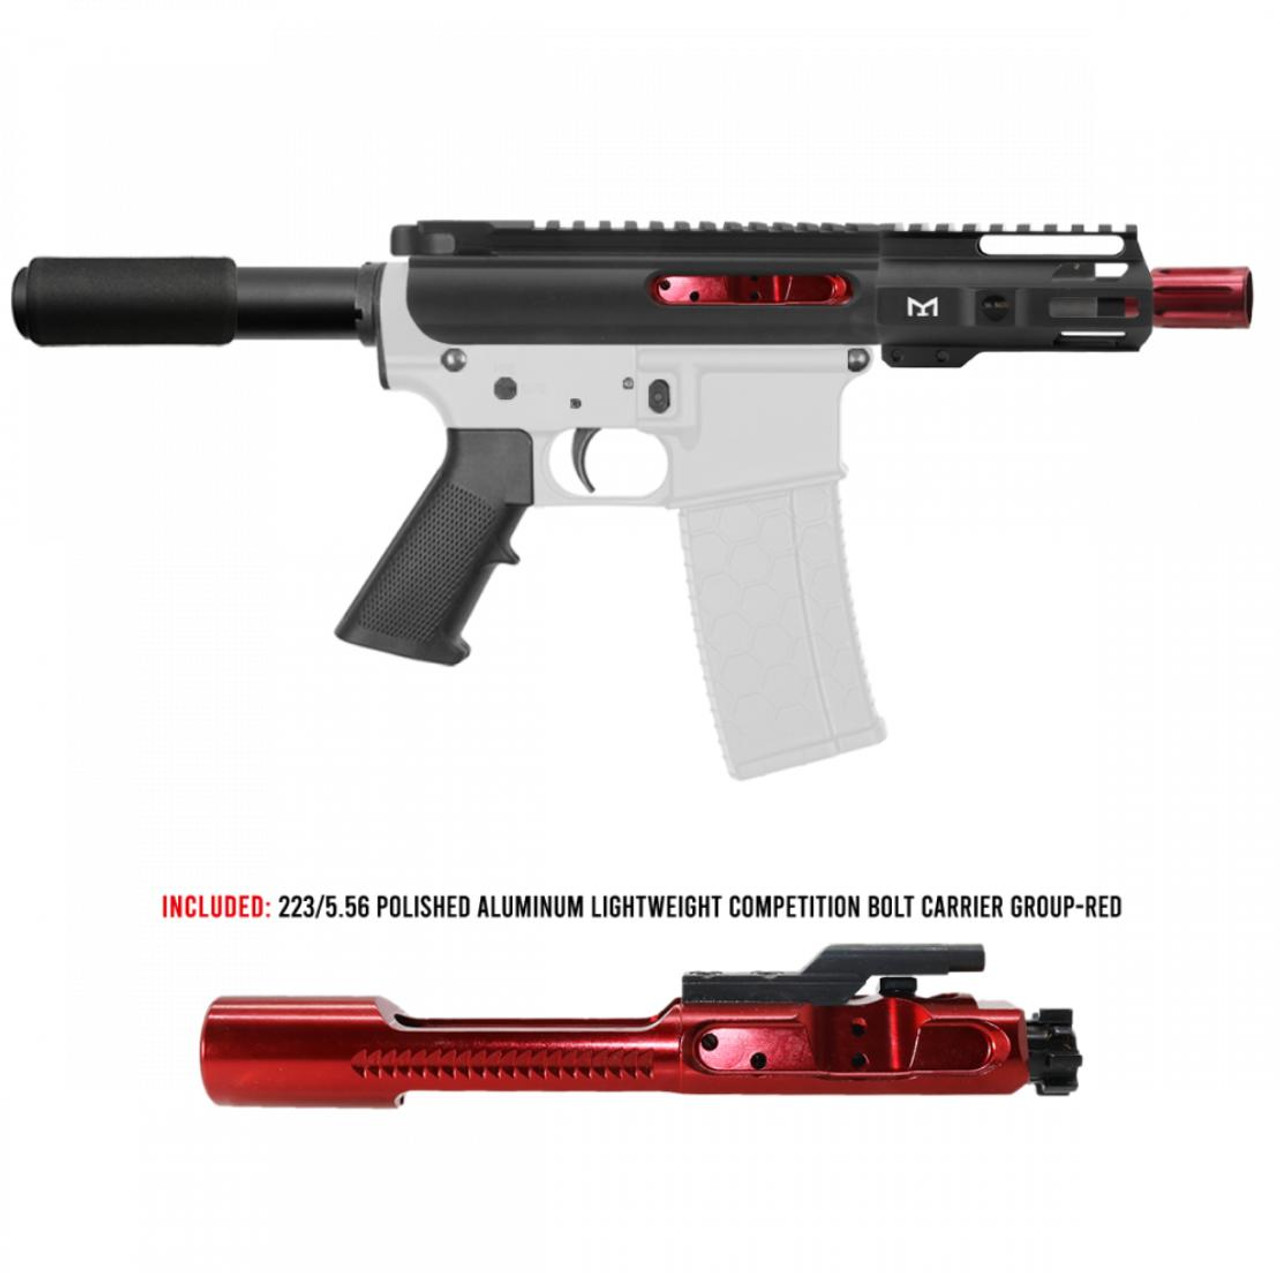 MCS AR-15 5.56 NATO 5'' PISTOL KIT - FORGED UPPER WITH 4'' M LOK RAIL - INCLUDED RED BCG 